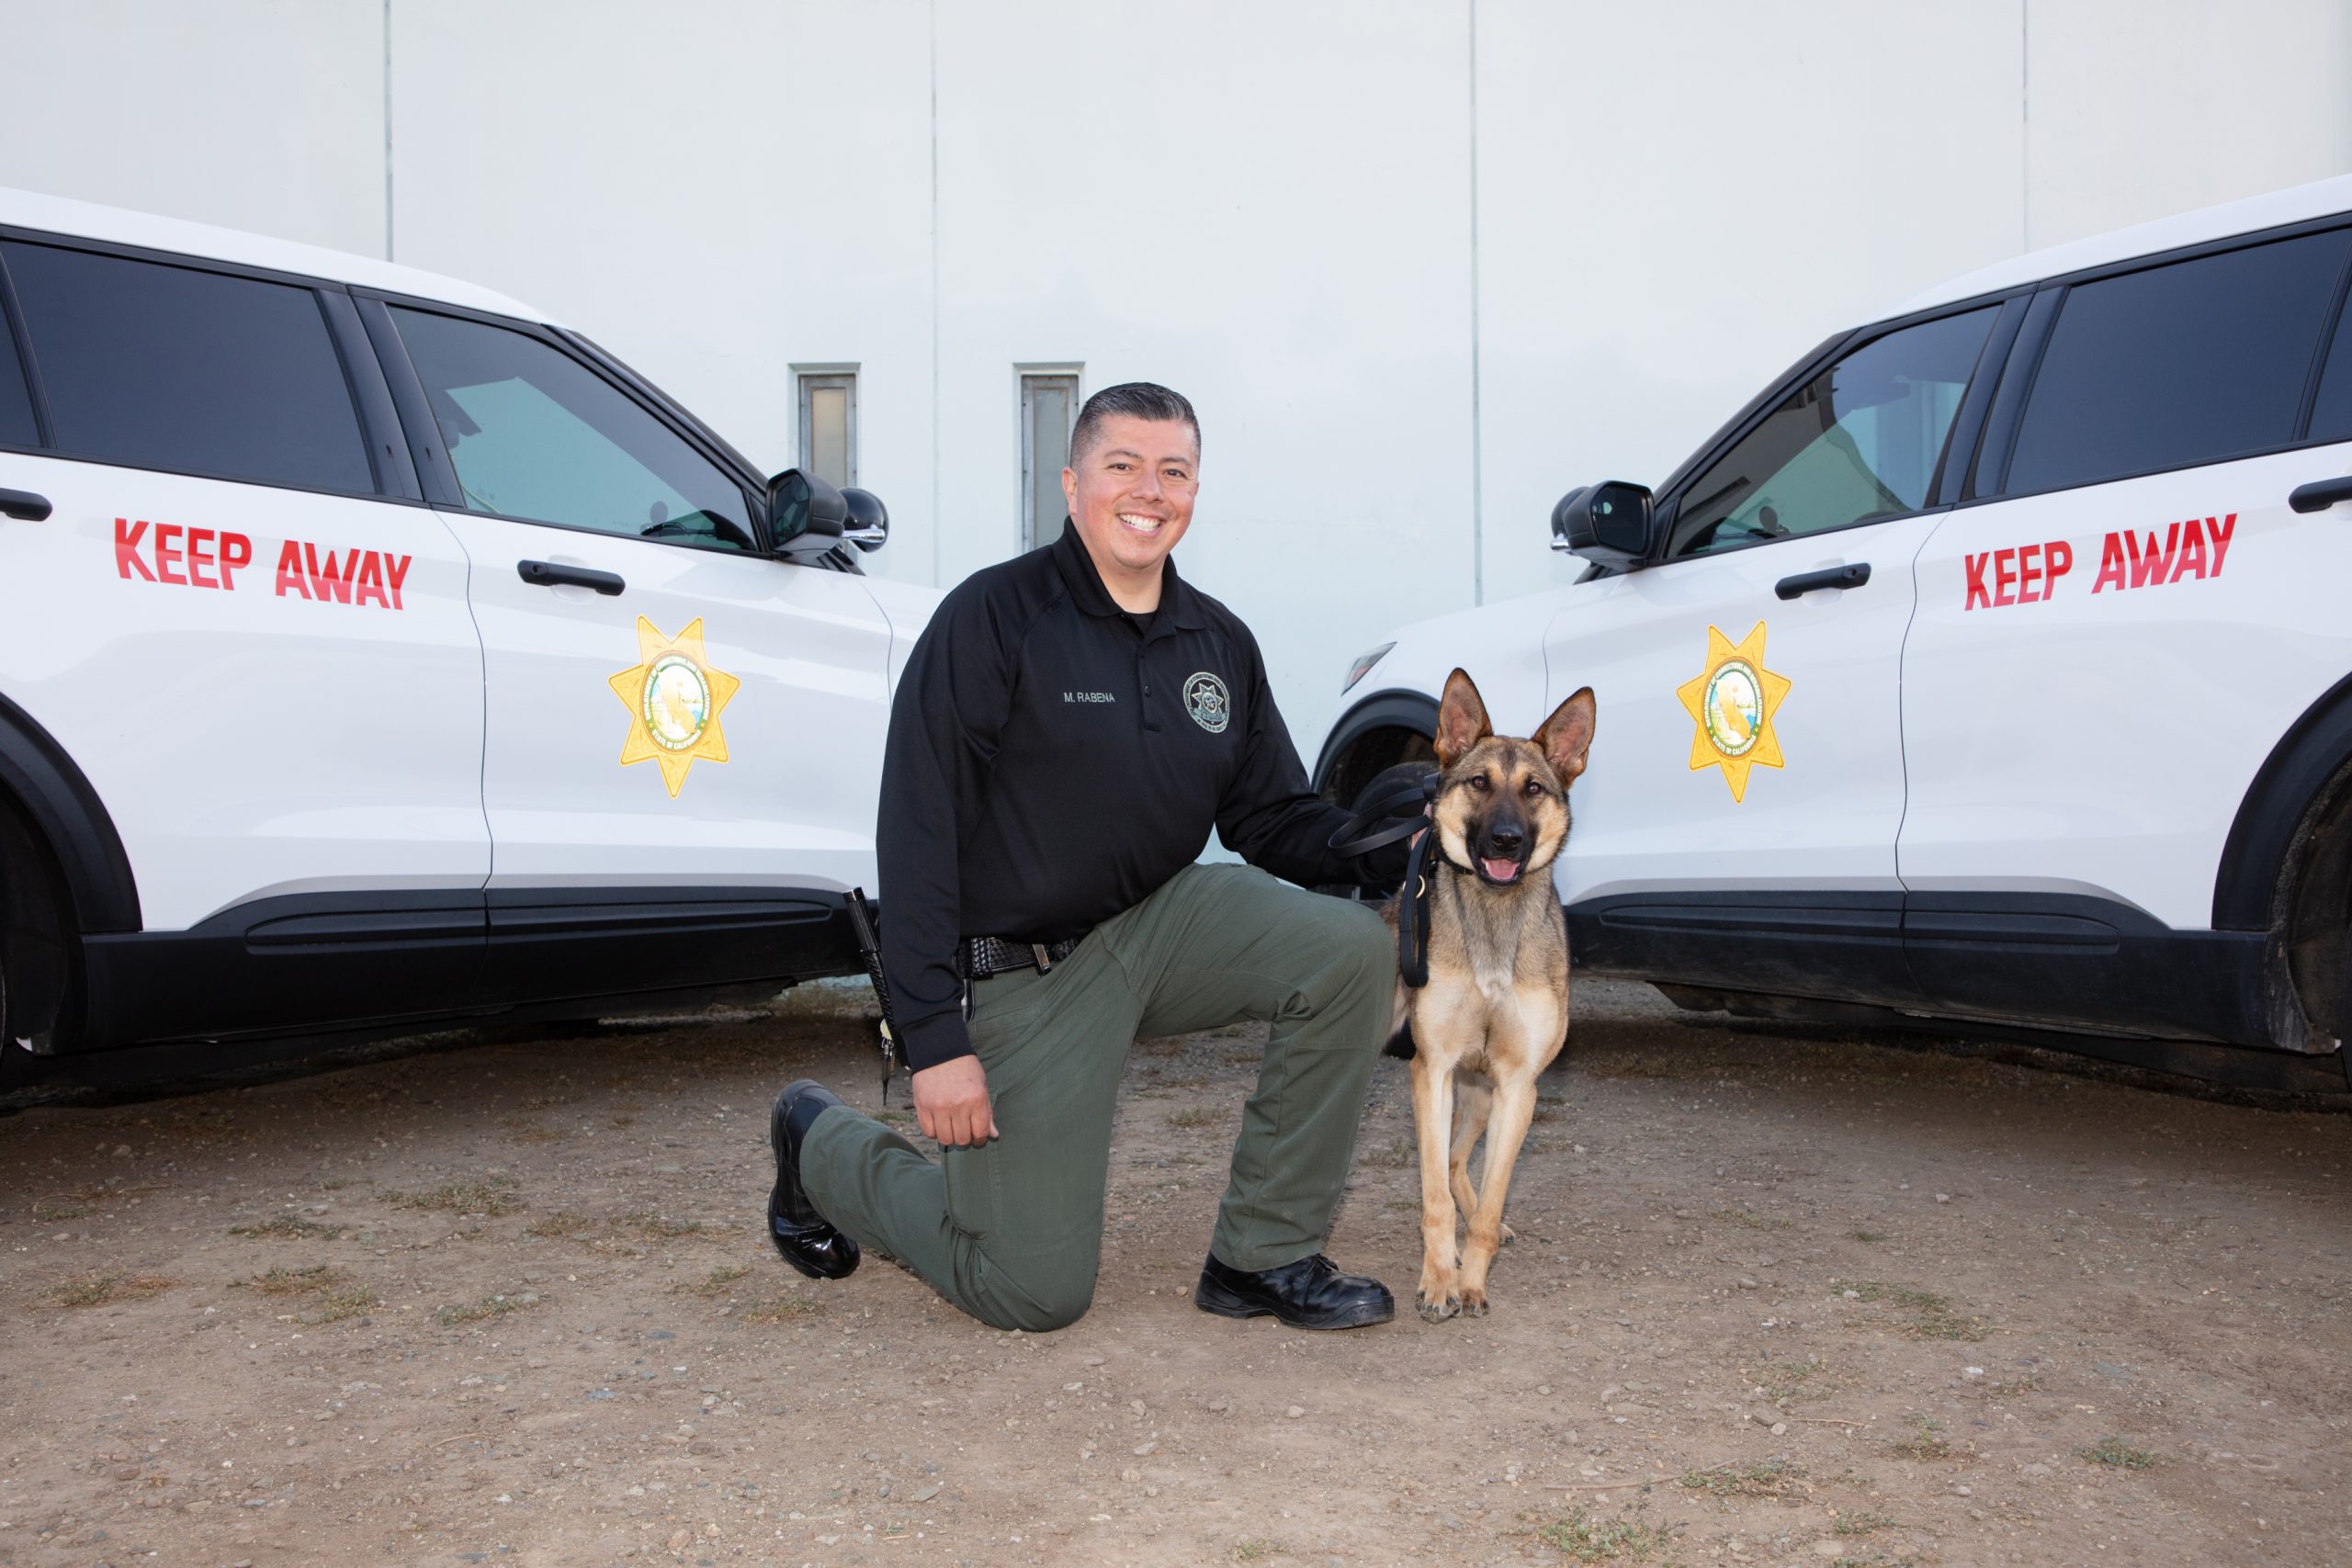 Correctional officer Rabena, two vehicles and a CDCR K-9.